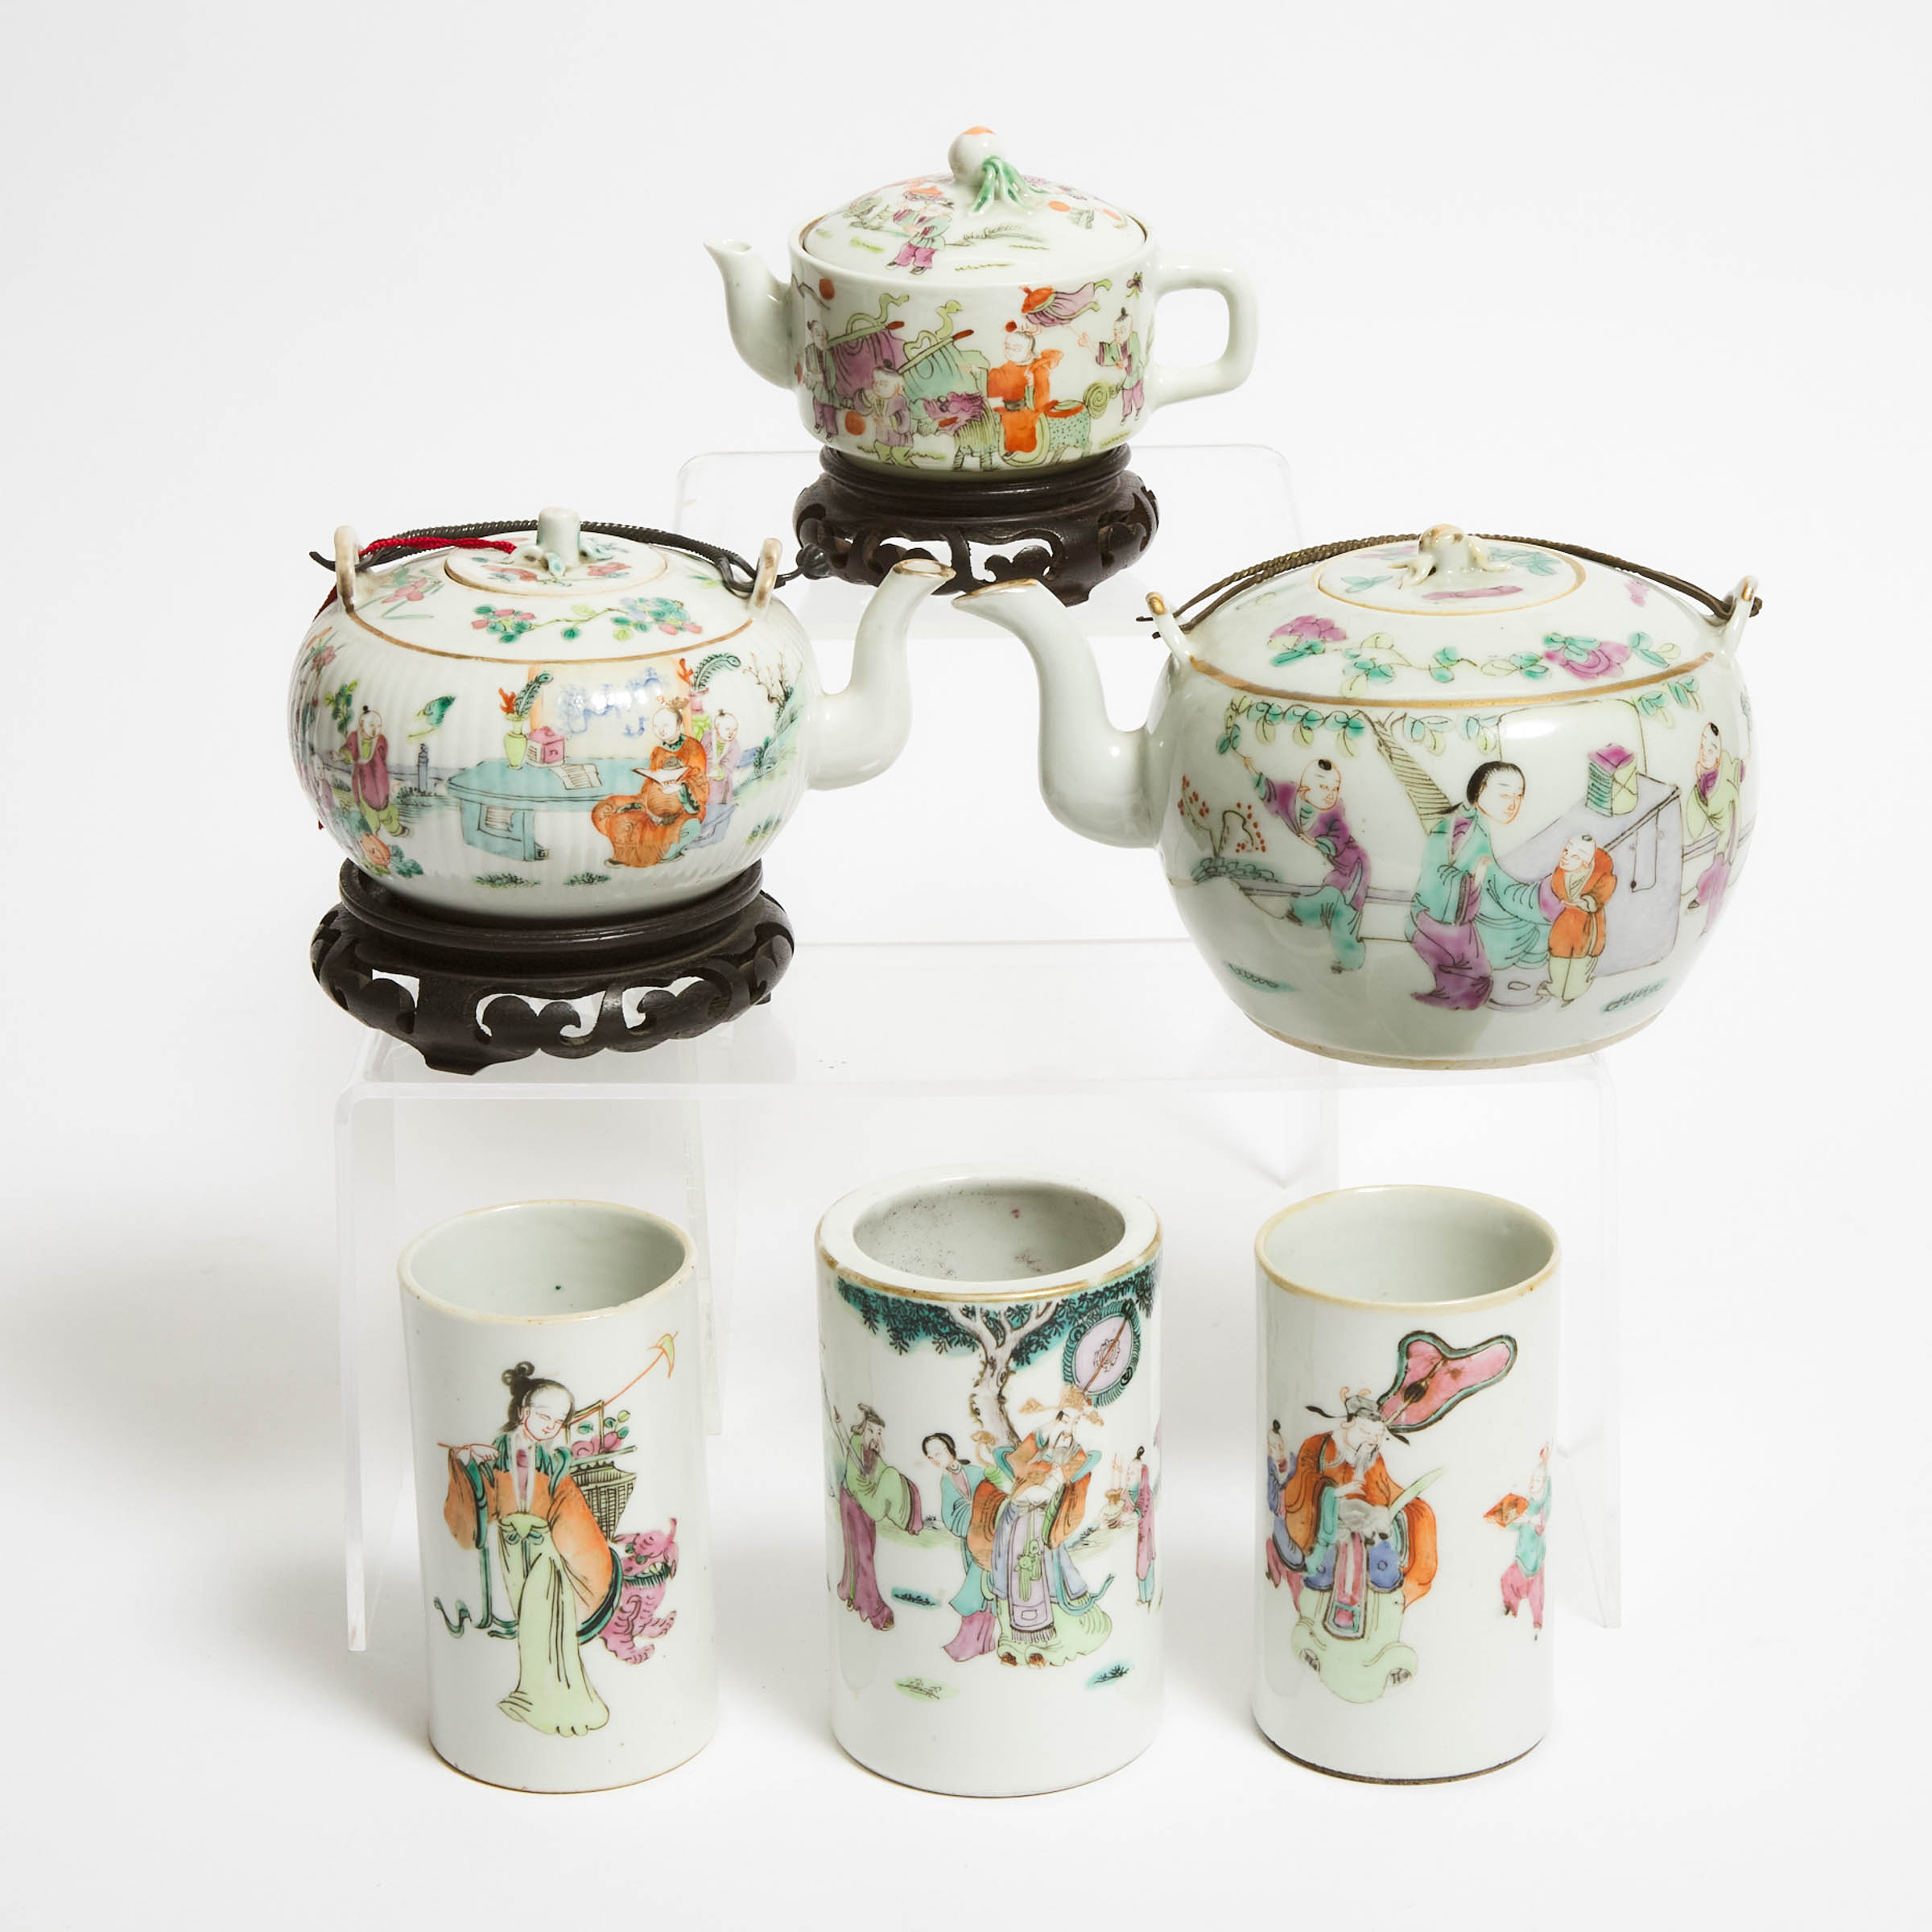 A Group of Six Famille Rose Teapots and Brush Pots, Late Qing Dynasty